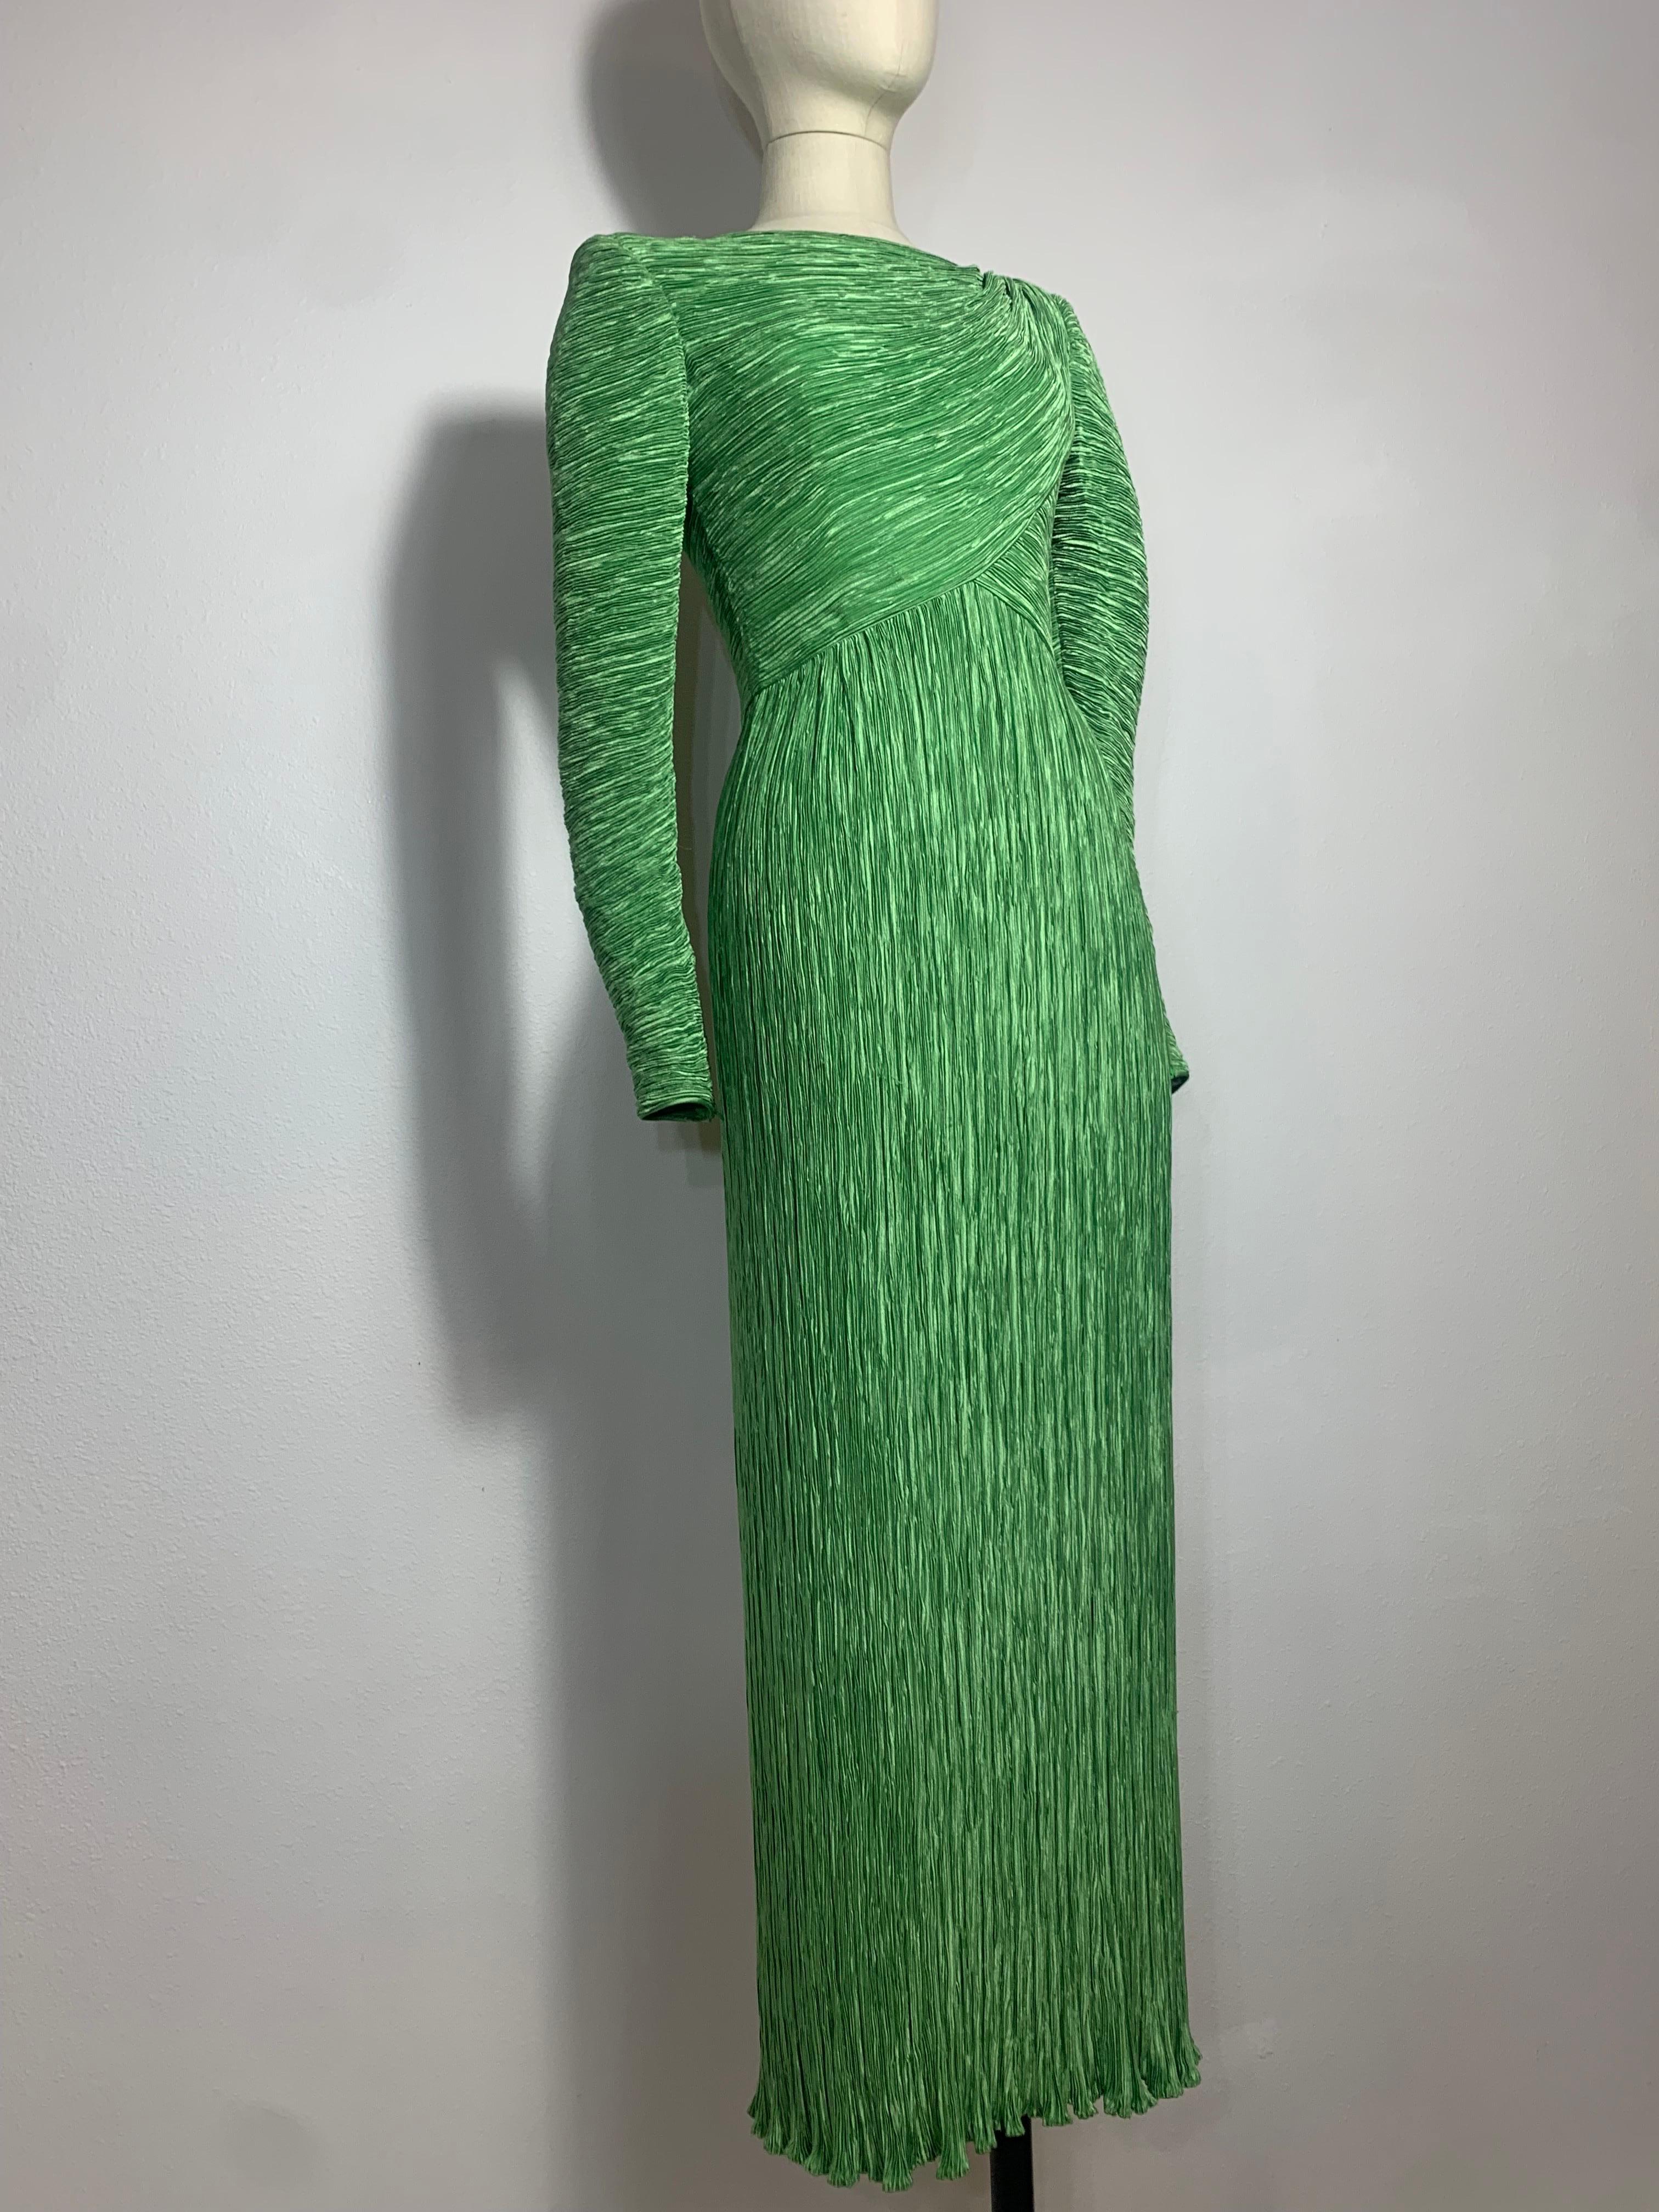 1980s Mary McFadden Jade Green Fortuny-Style Silk Column Gown w Long Sleeves In Excellent Condition For Sale In Gresham, OR